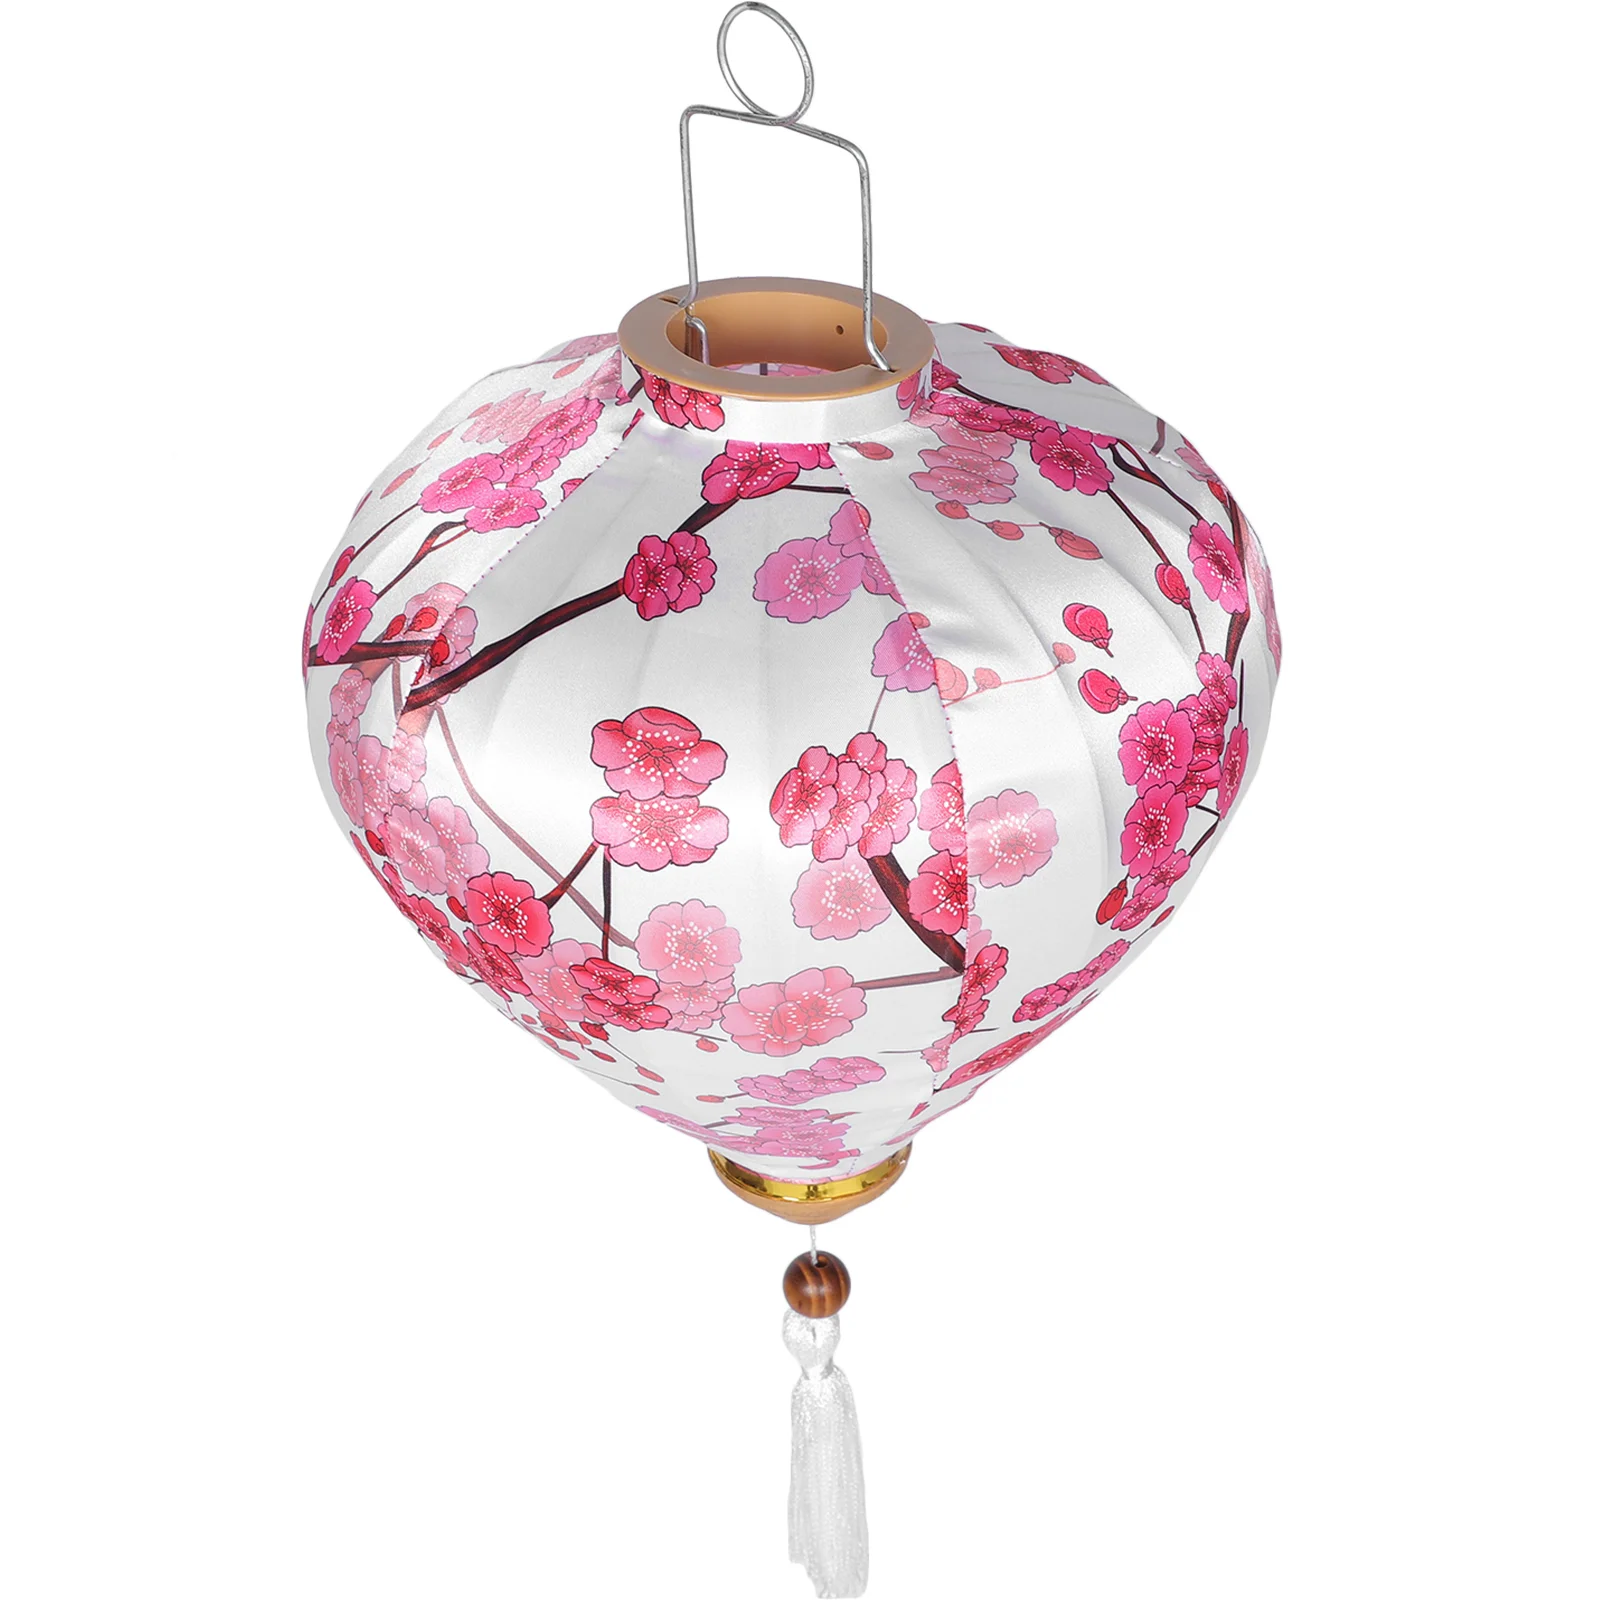 

Lantern Chinese Lanterns Holiday Celebration for Outdoor Oval Garden Mid-autumn Hanging